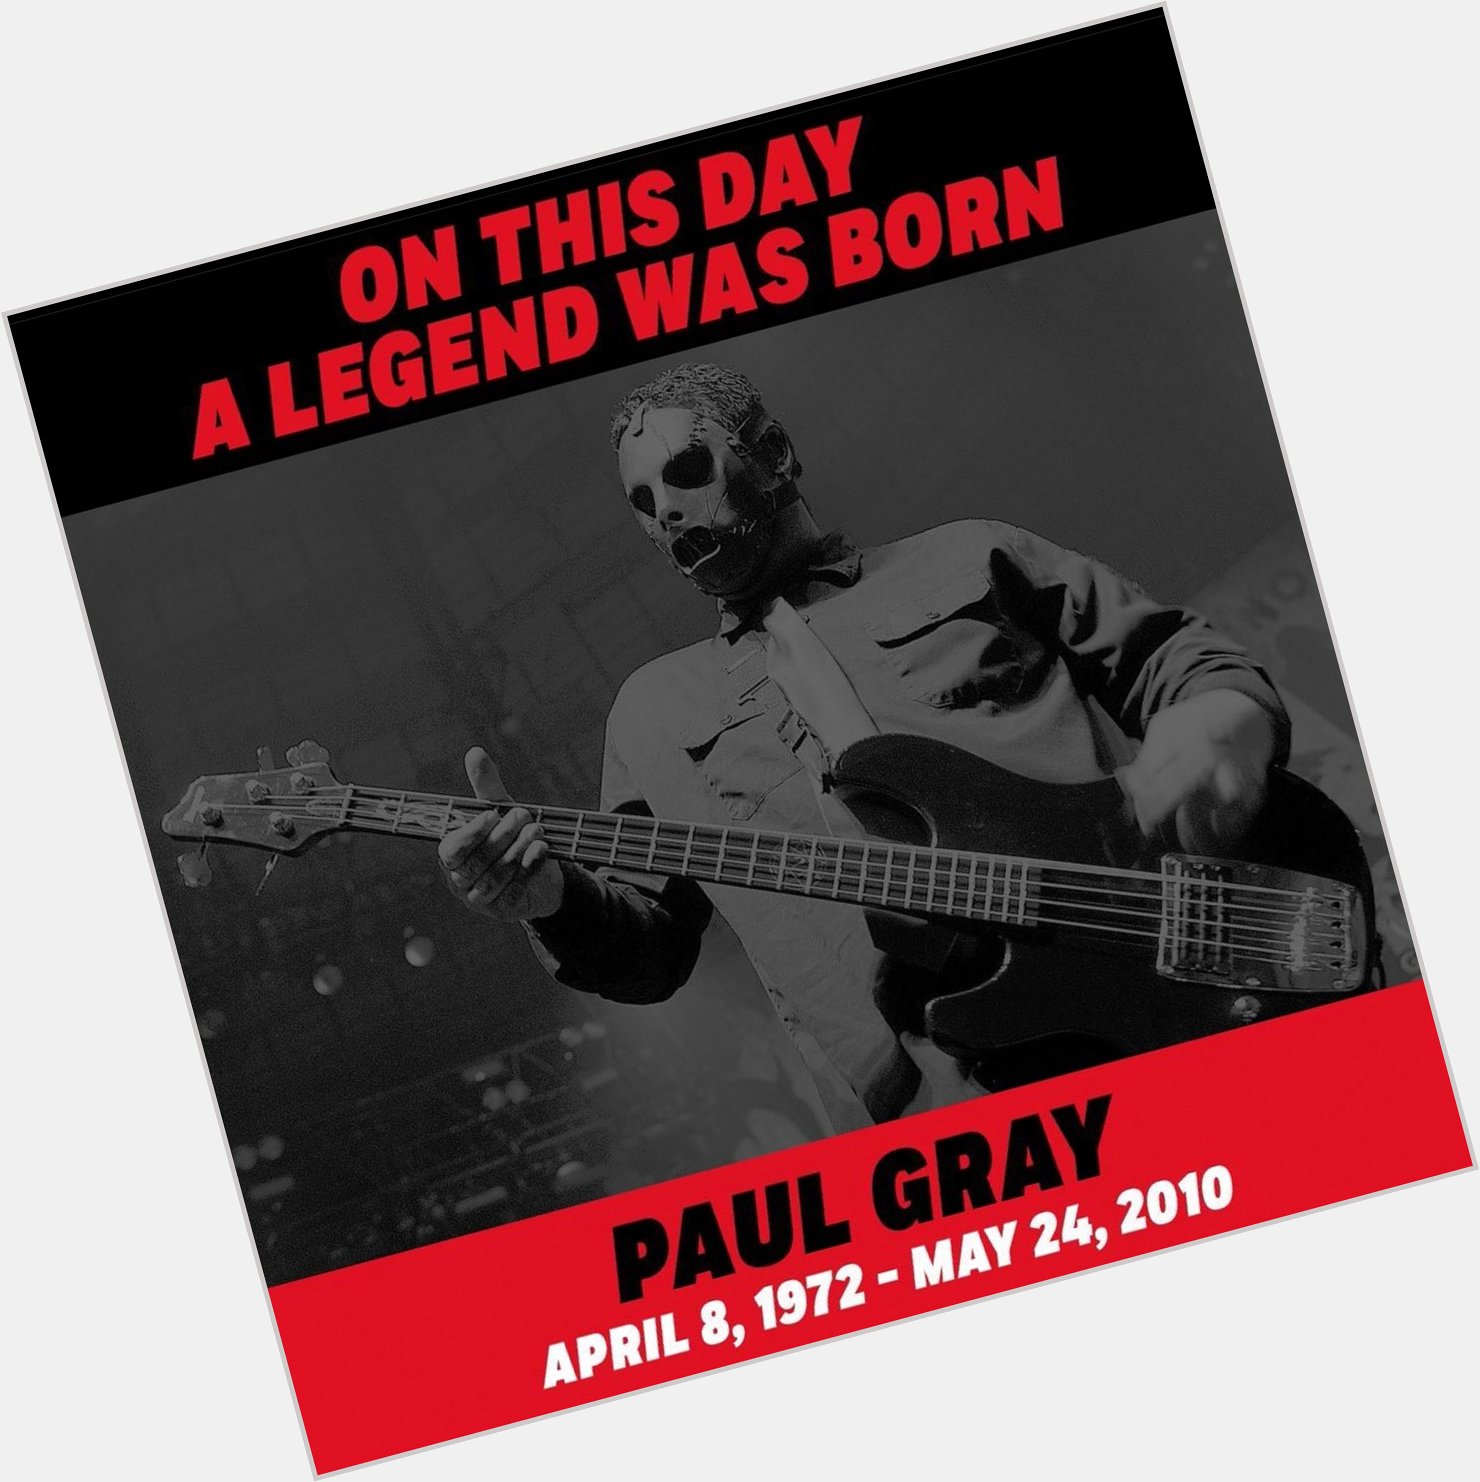 Happy birthday to the late Paul gray,, may he rest in peace we will miss him 